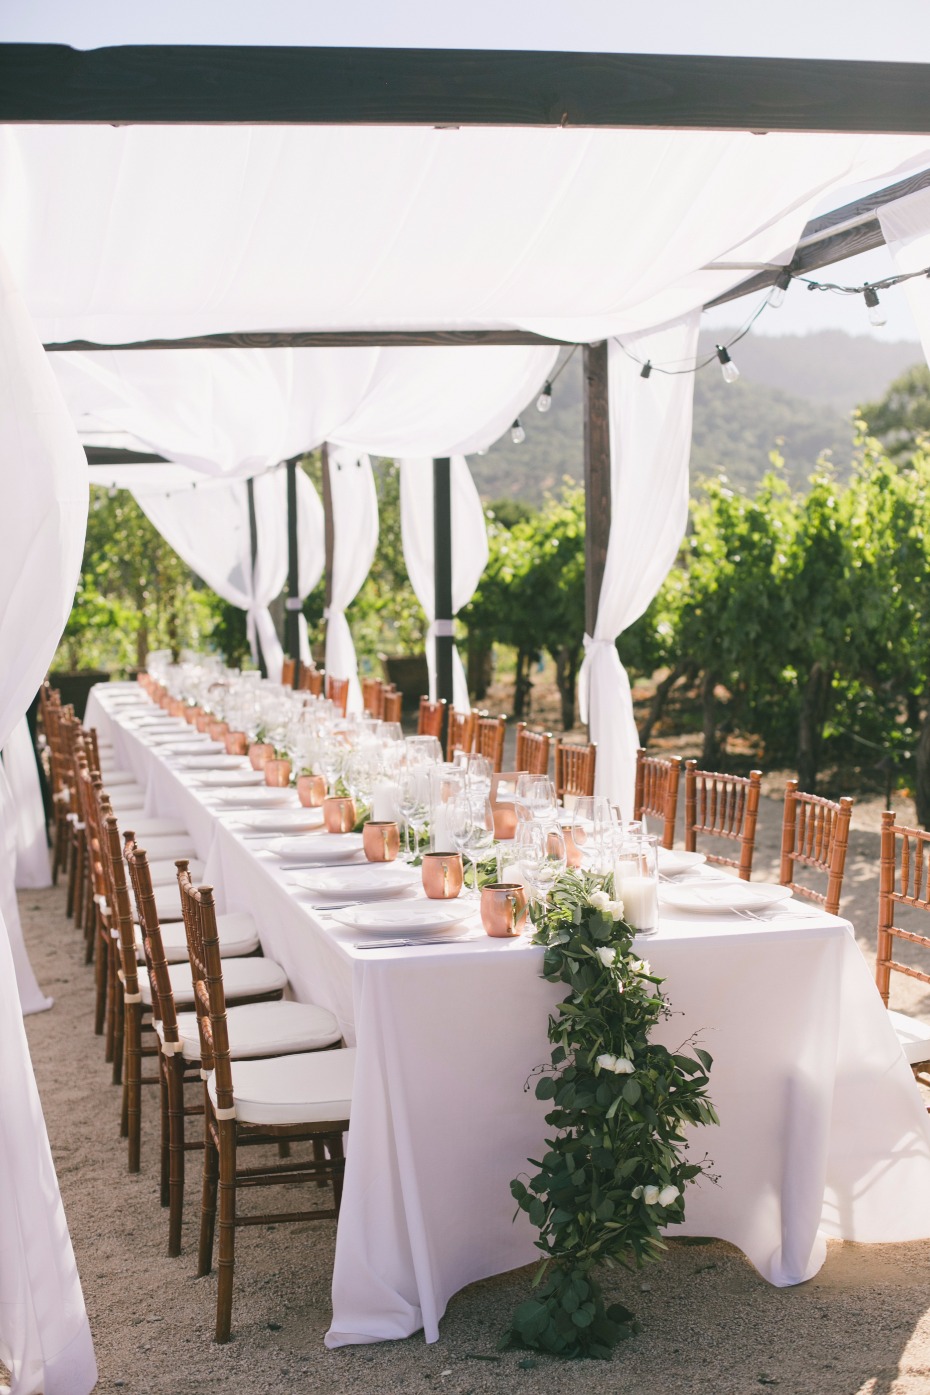 Gorgeous reception space at a vineyard